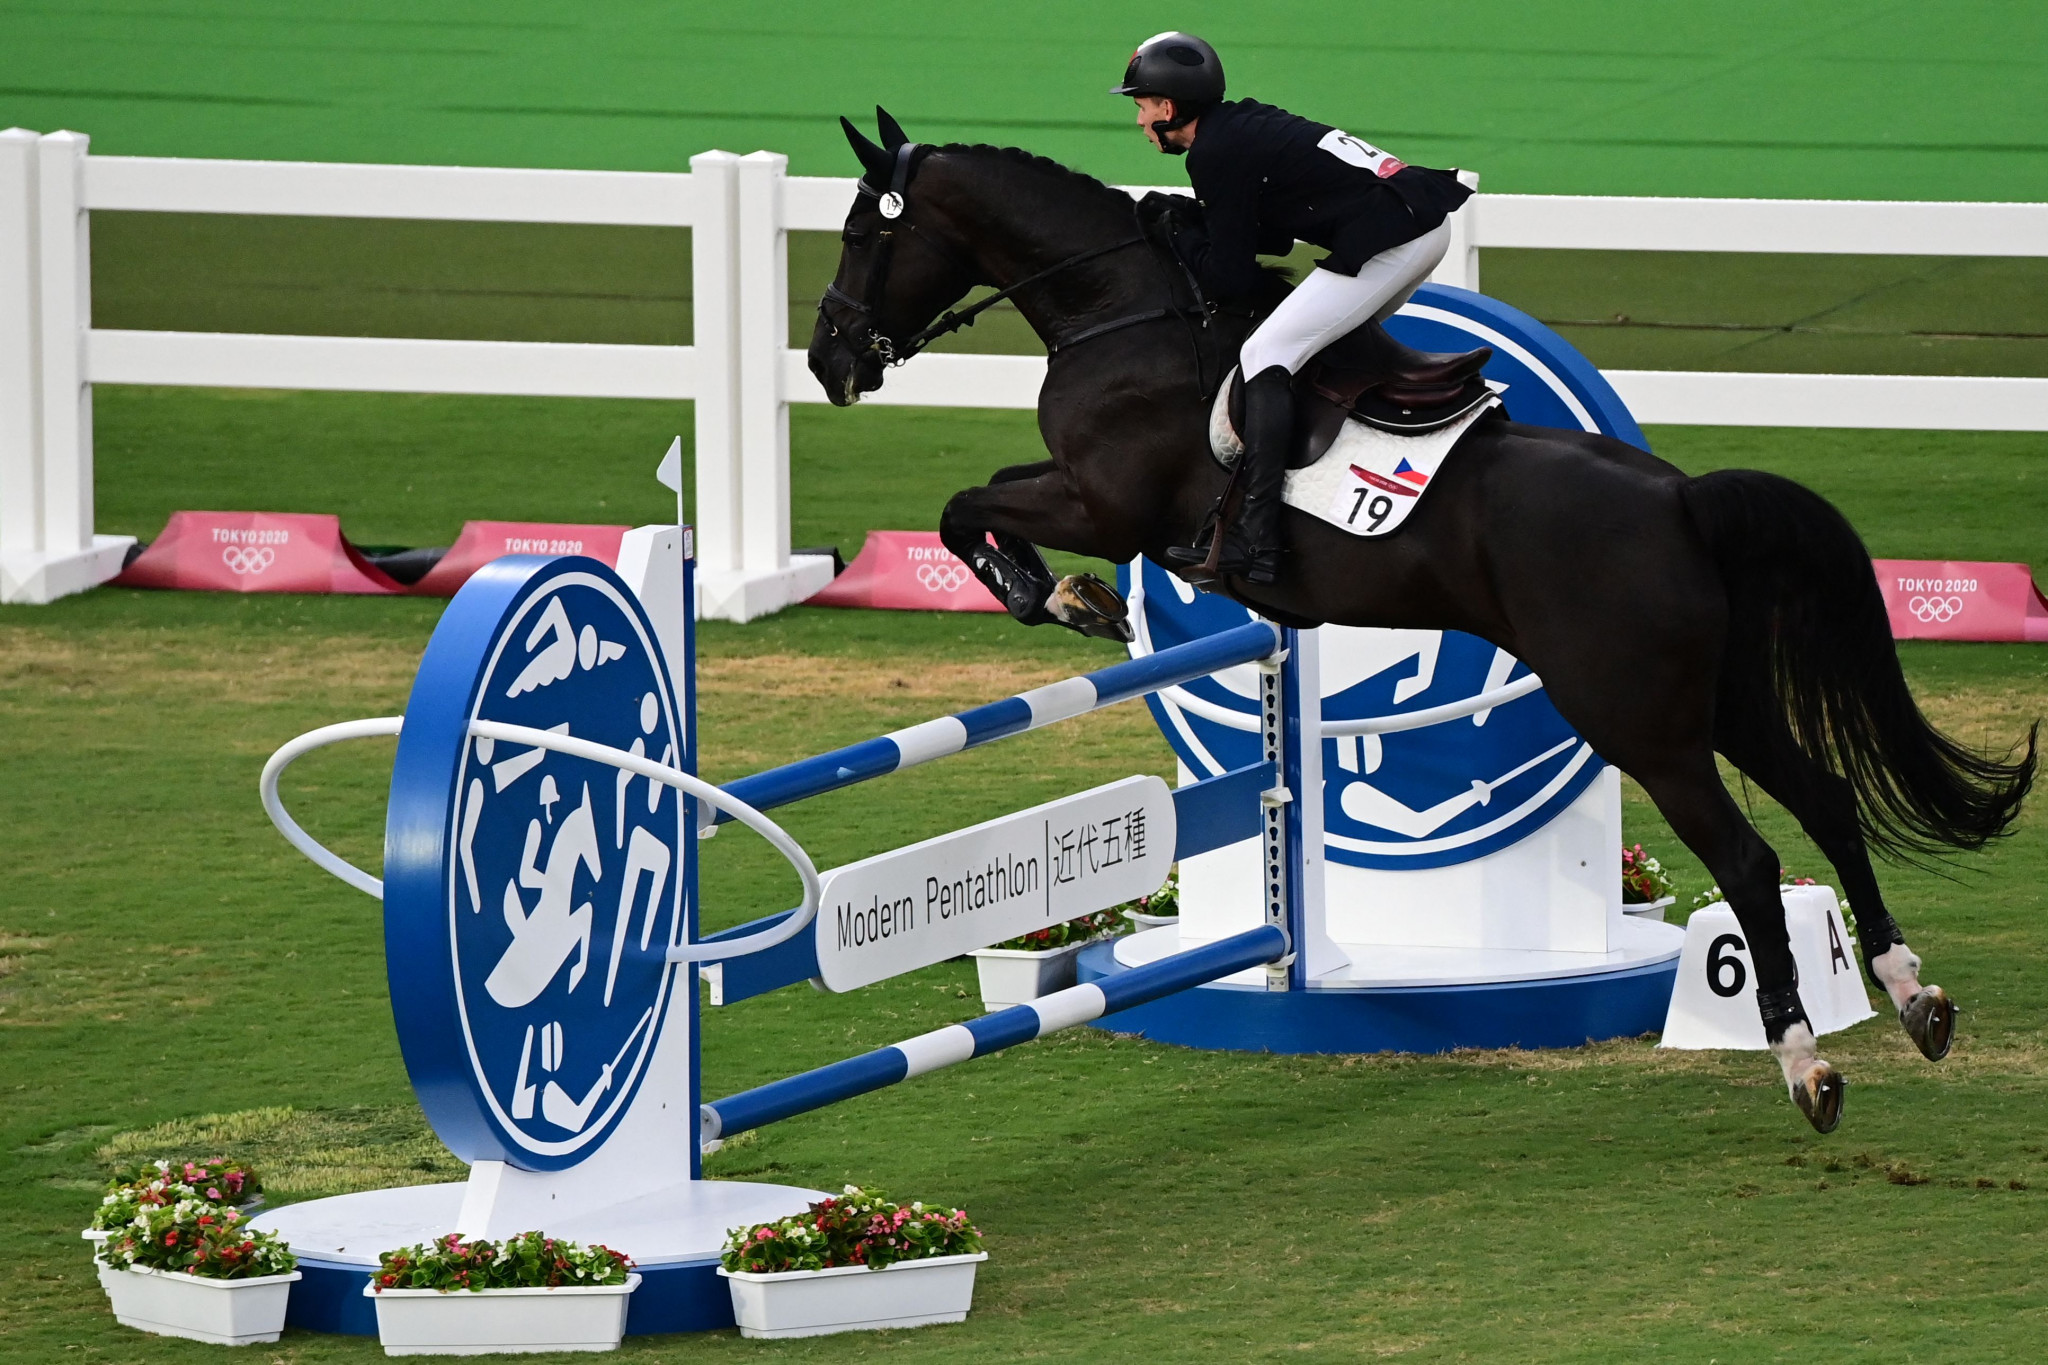 The scandal in the riding section of the modern pentathlon event at Tokyo 2020 sparked the UIPM into action, but changes have long been overdue ©Getty Images